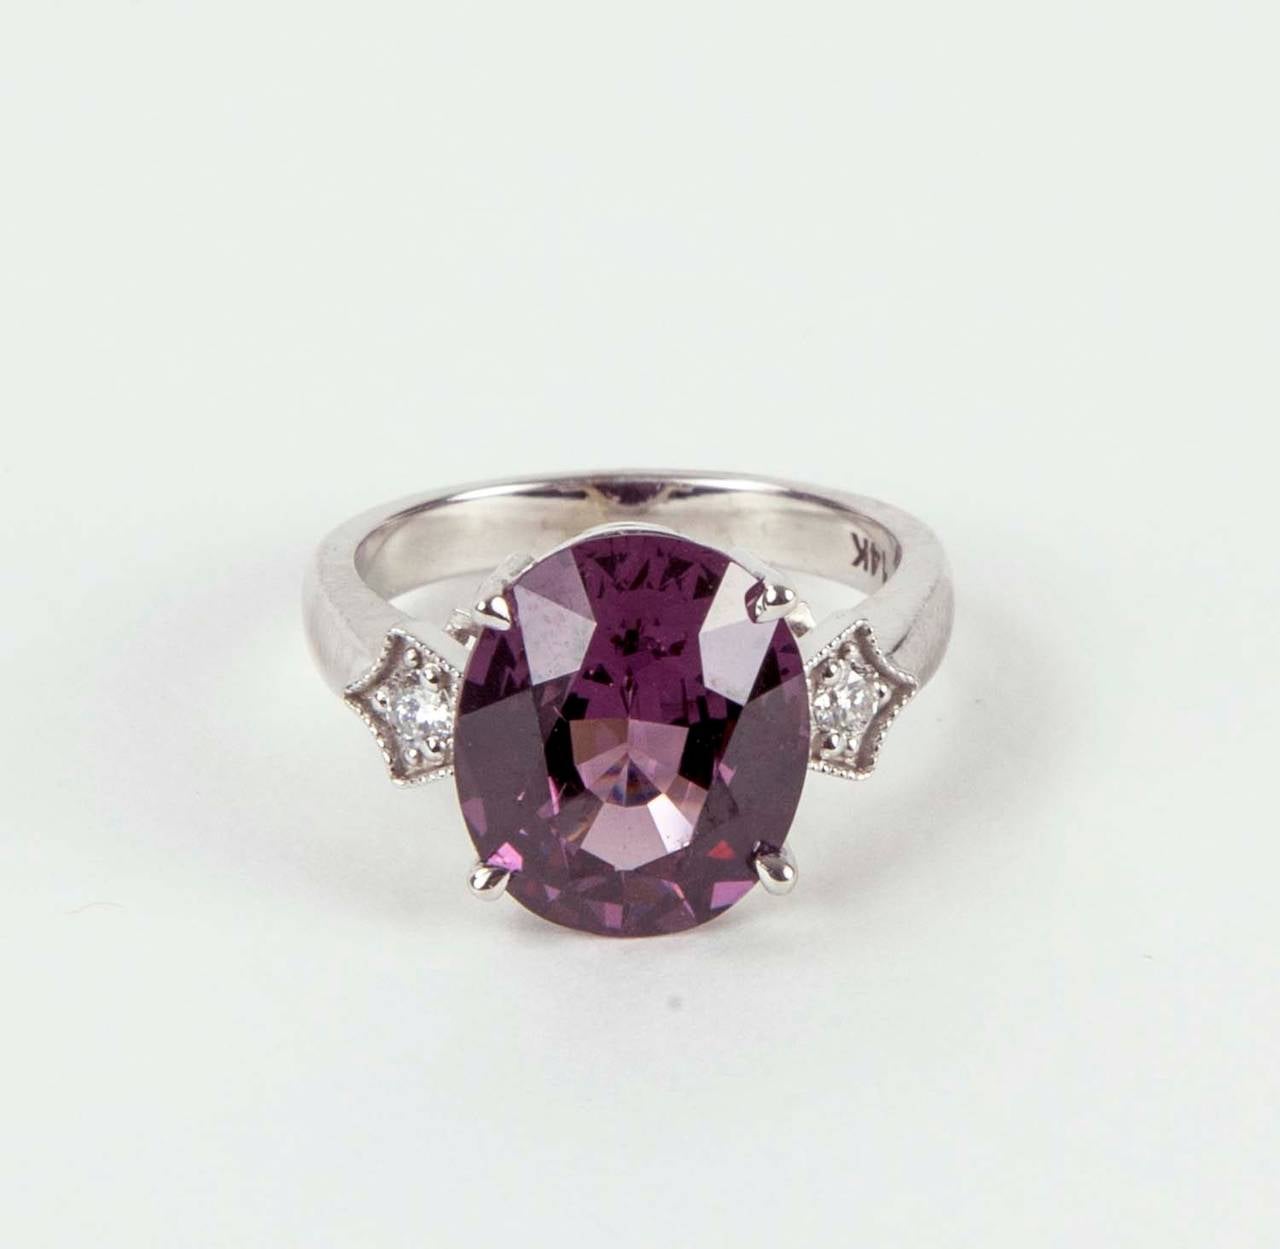 7.37 Carat Cushion Cut Garnet Diamond Gold Ring In New Condition For Sale In Montreal, QC